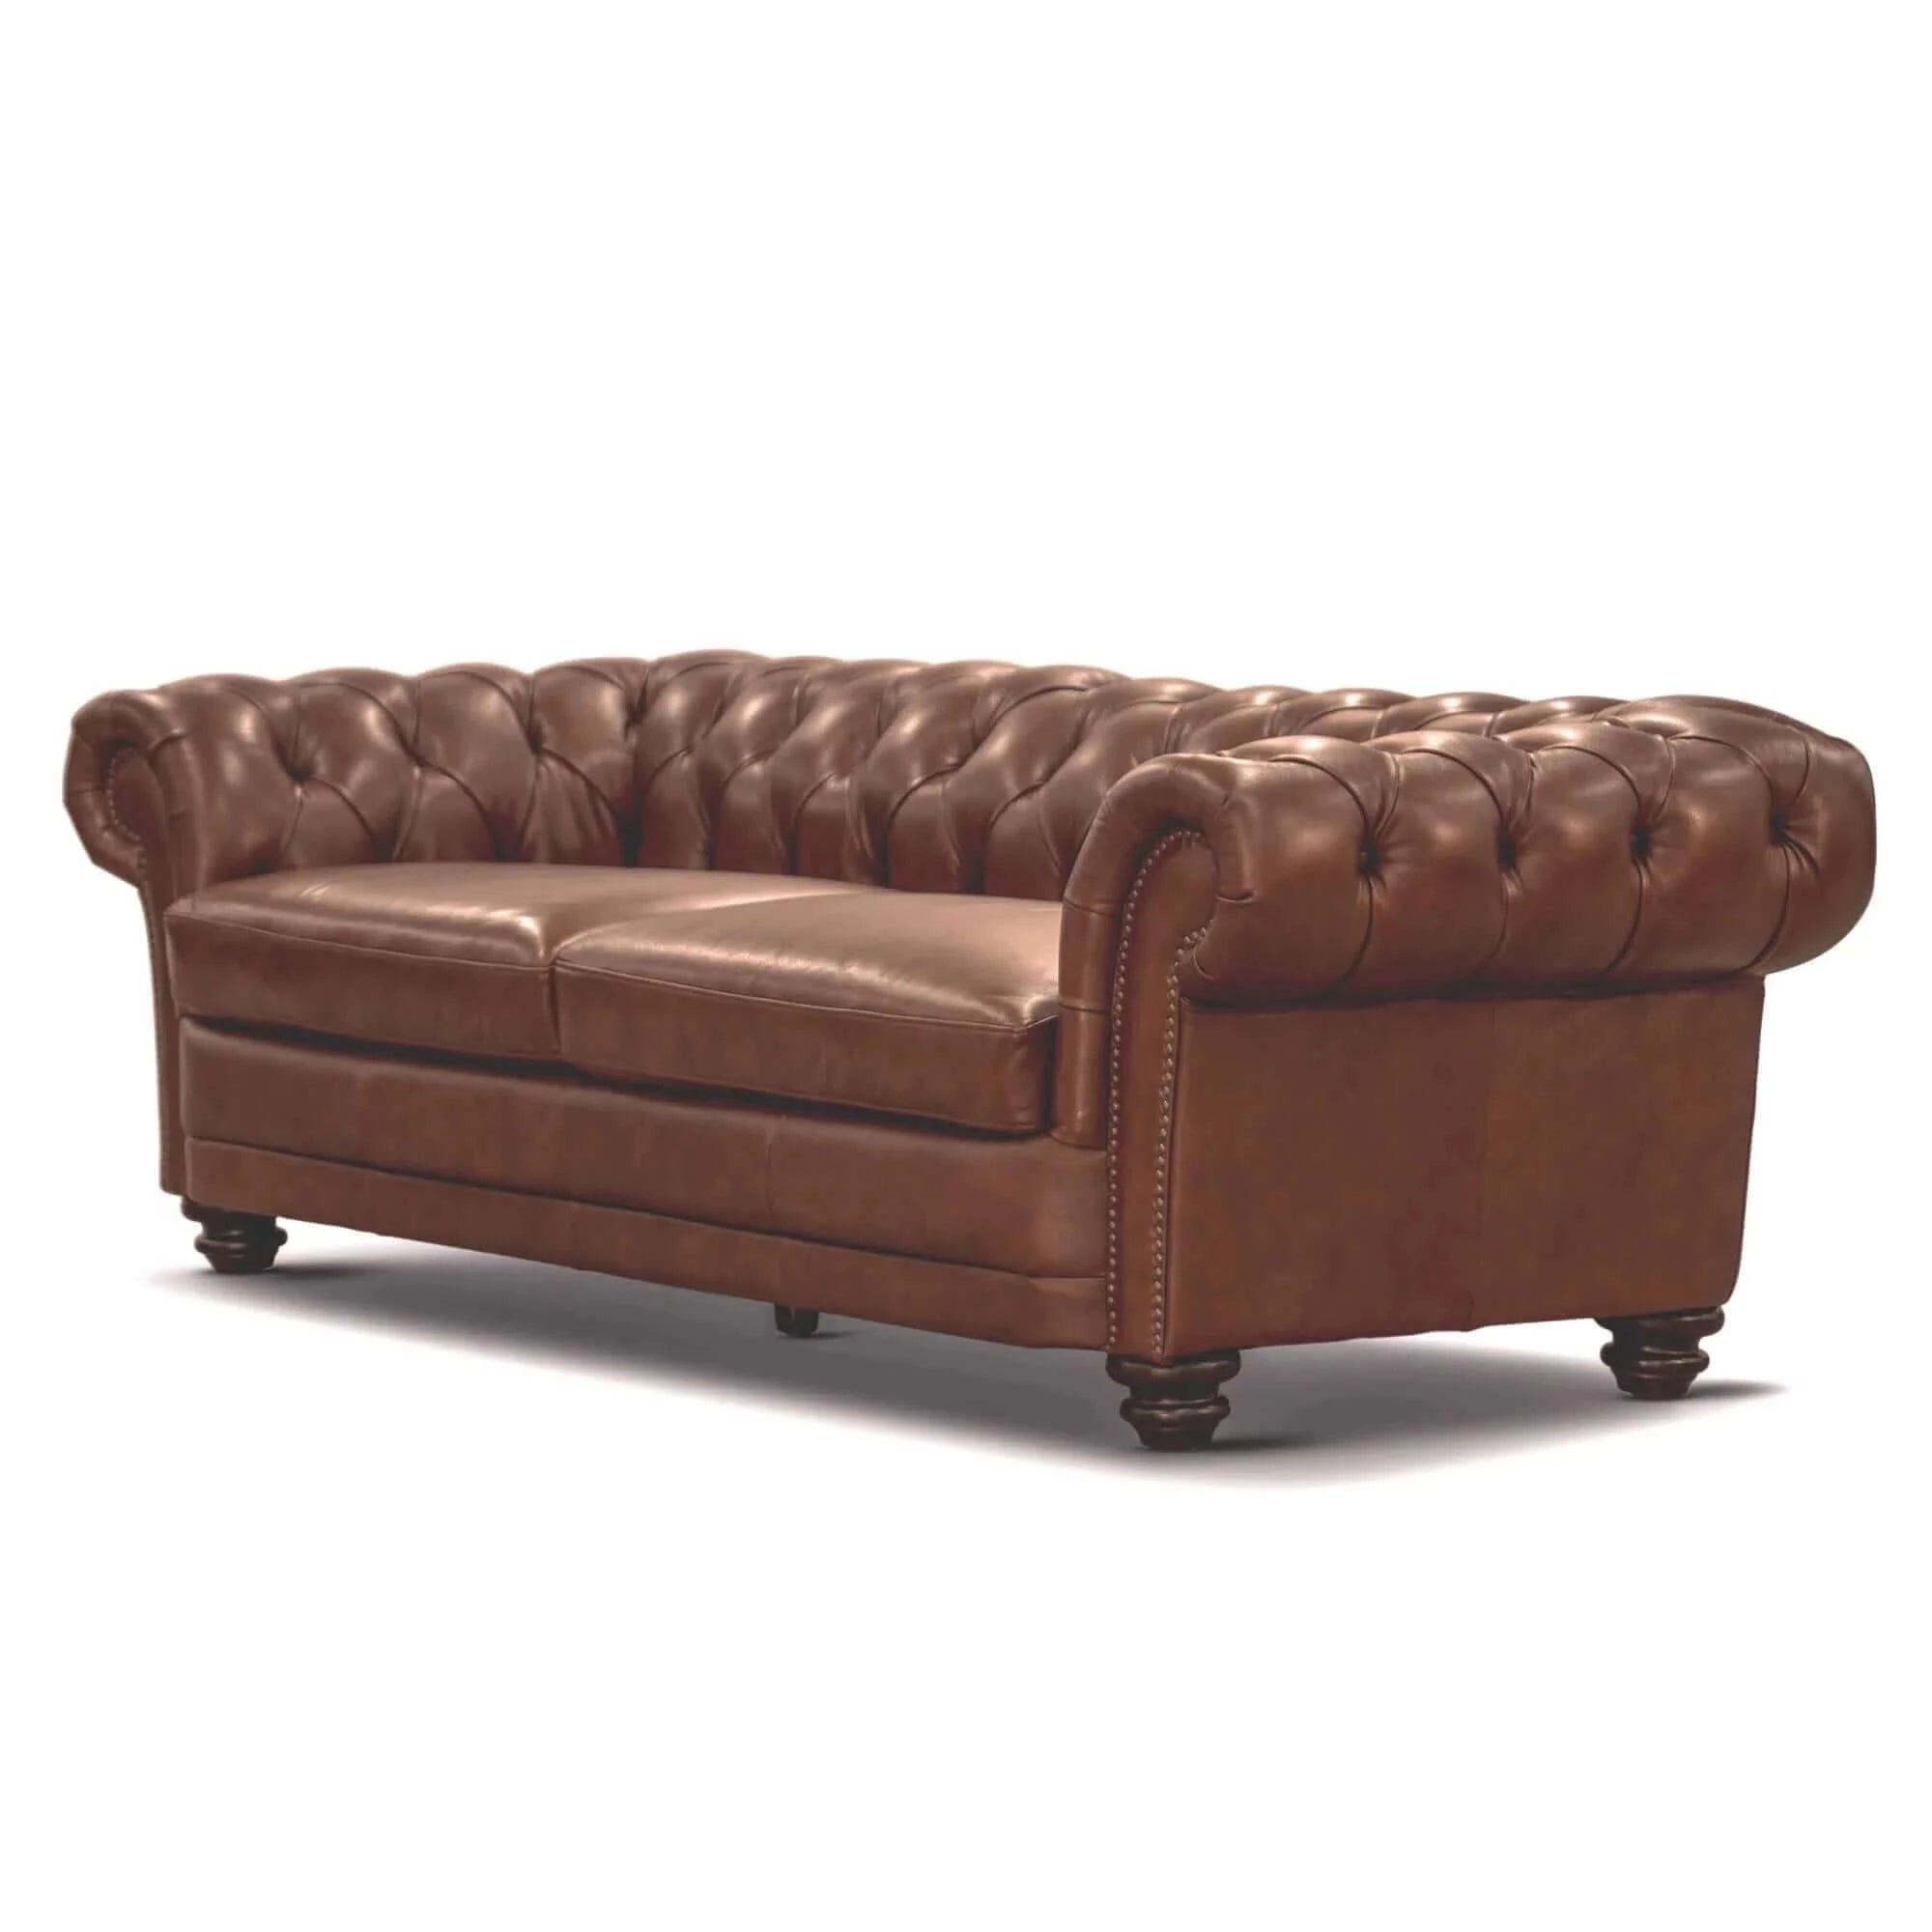 Buy sonny 3 seater genuine leather sofa chestfield lounge couch - butterscotch - upinteriors-Upinteriors